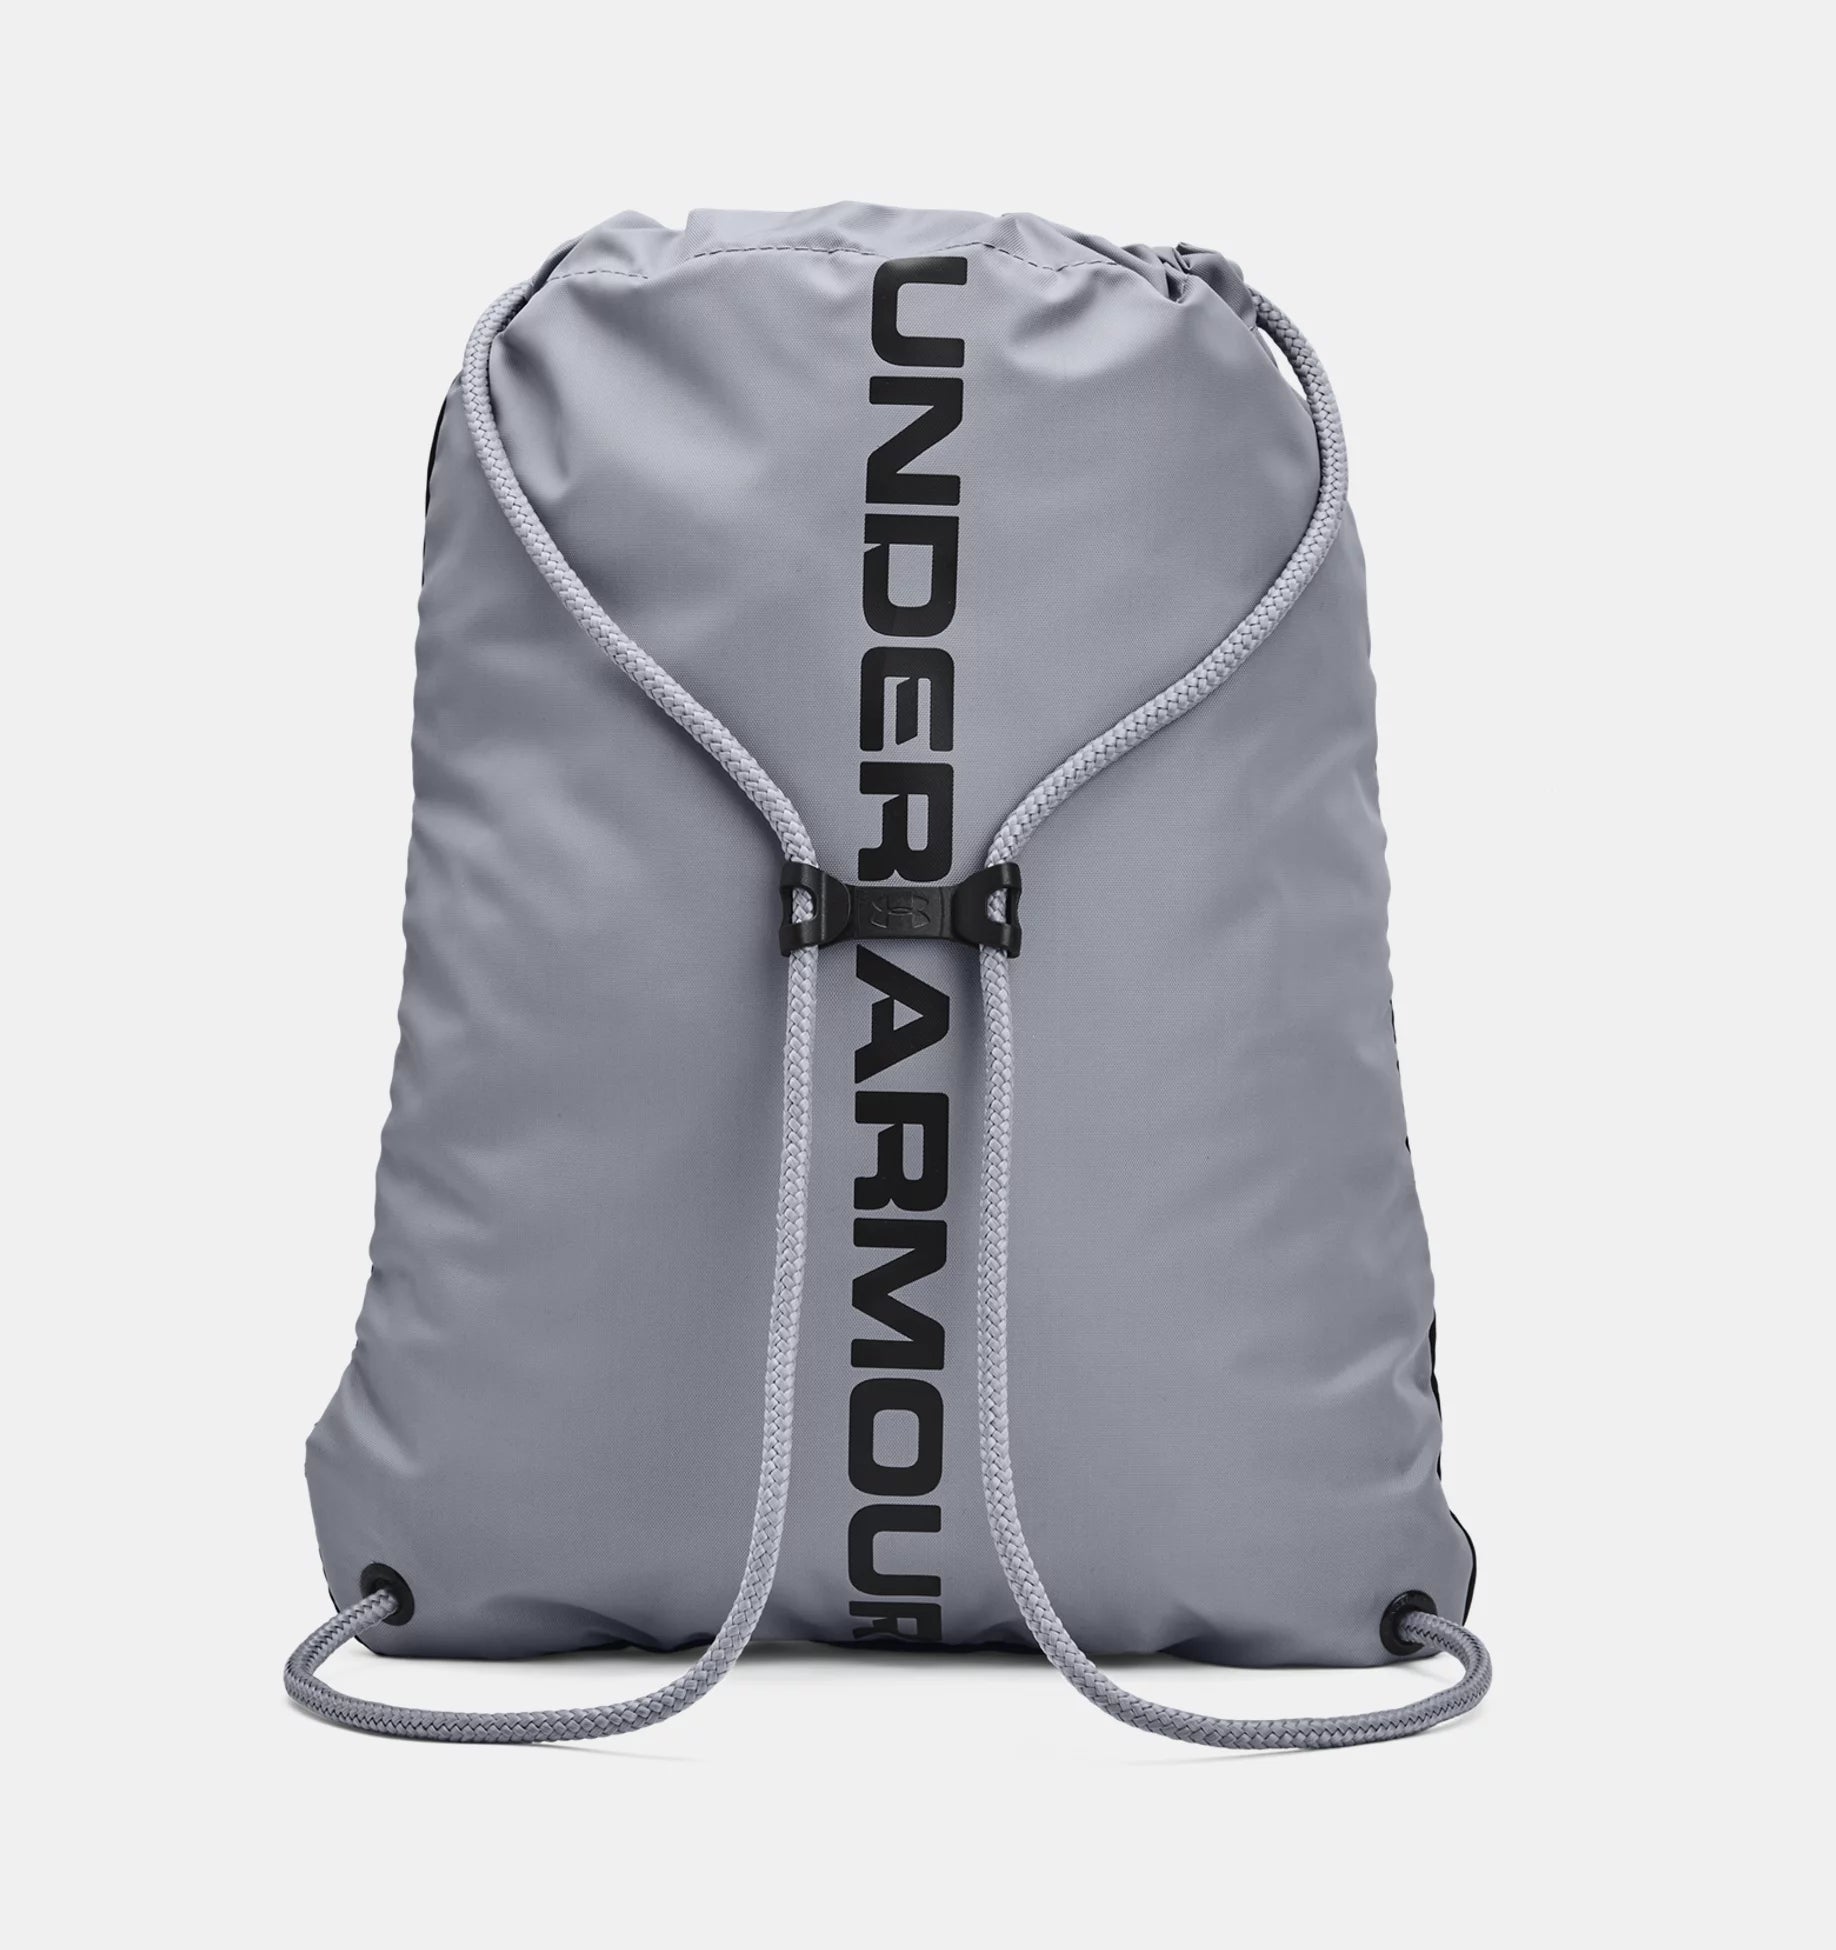 Under Armour UA Ozsee Sackpack 1240539 - Black/Gold